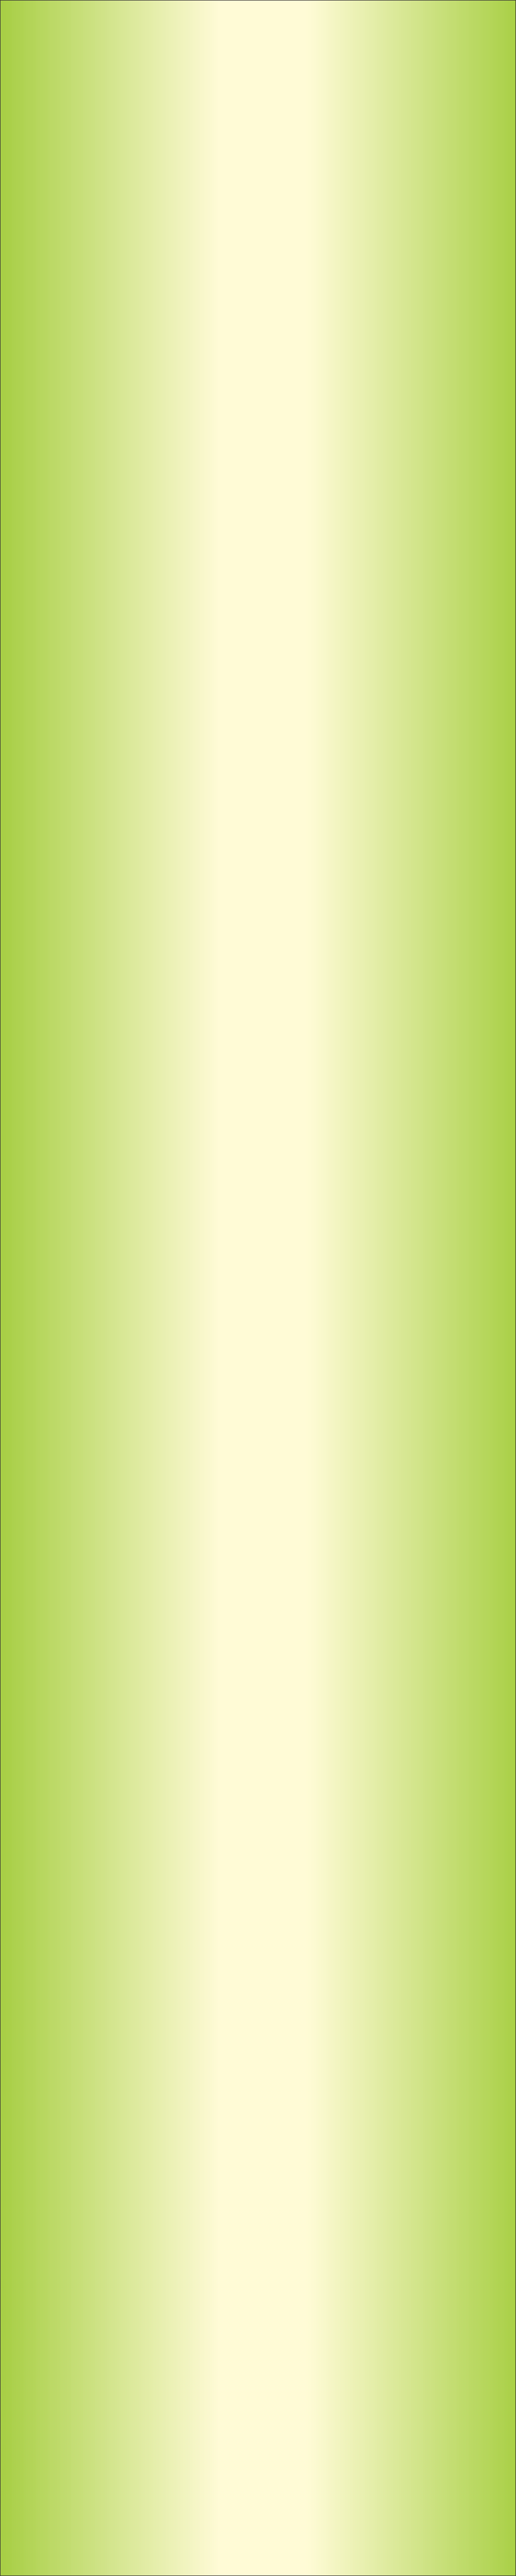 background-Green edges blending to pale yellow down the center.